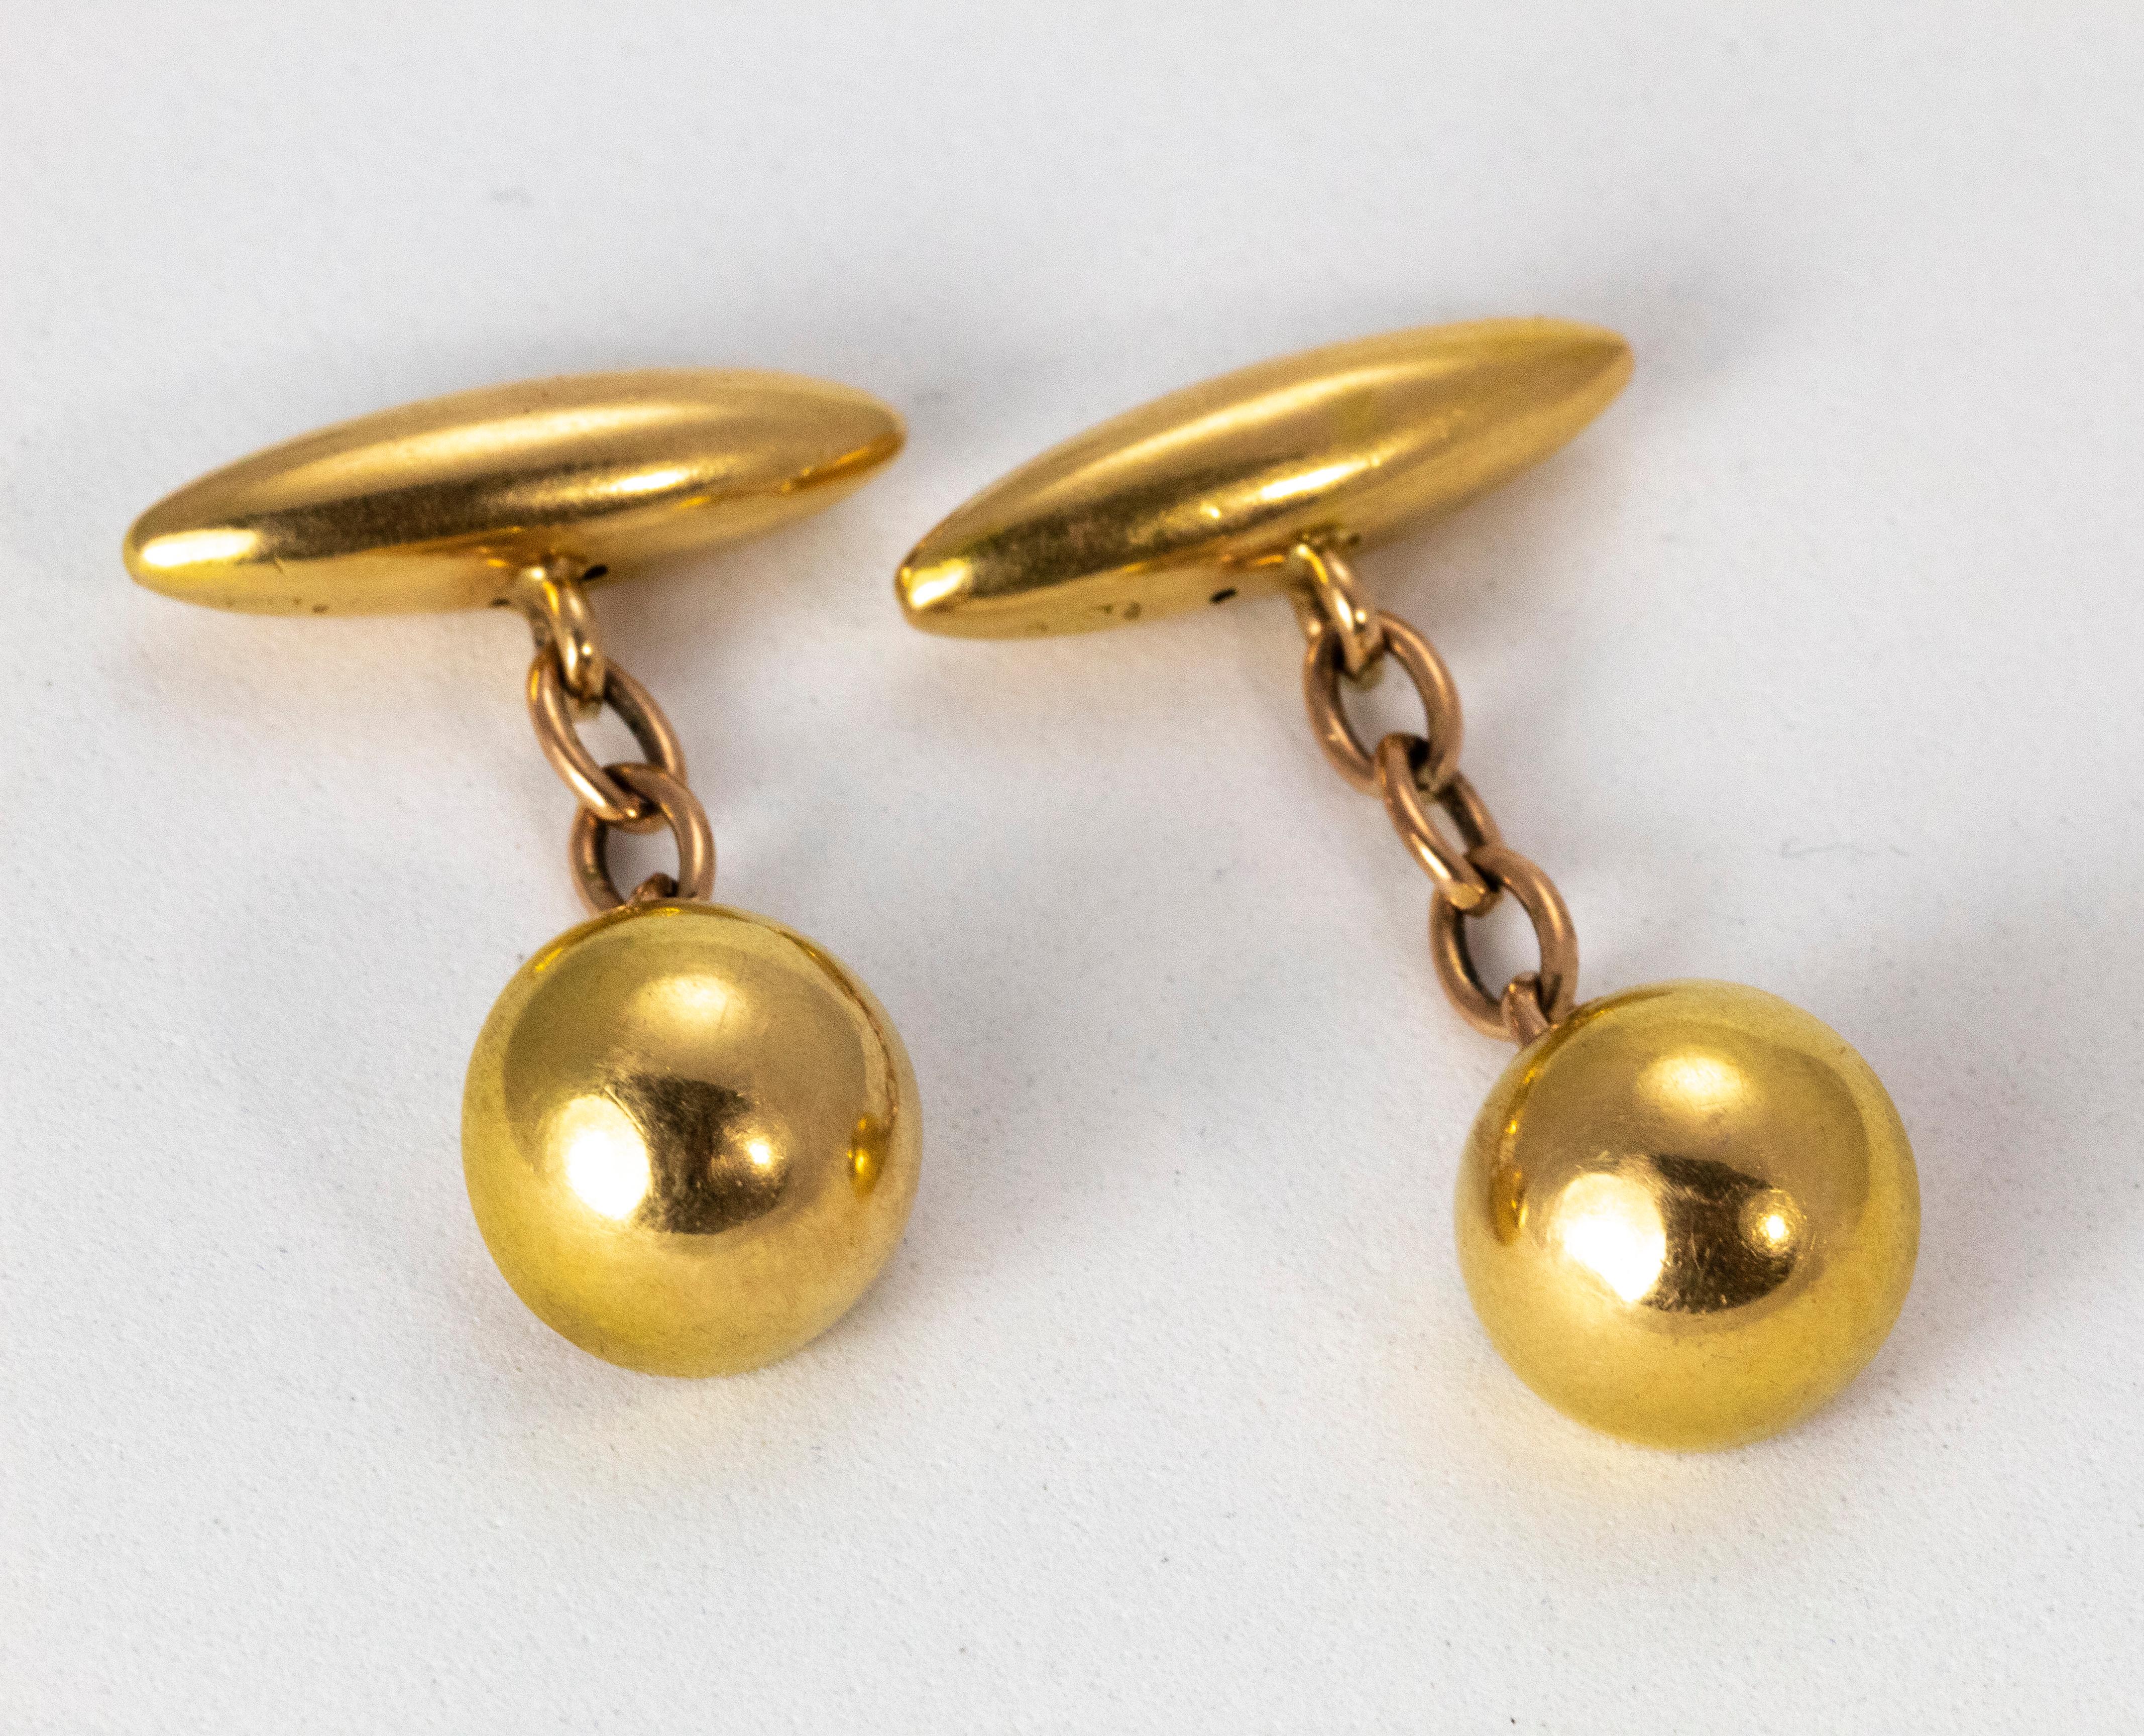 A pair of fine 15 Karat Yellow Gold Cufflinks with torpedo backs from the Edwardian era, truly timeless pieces. 